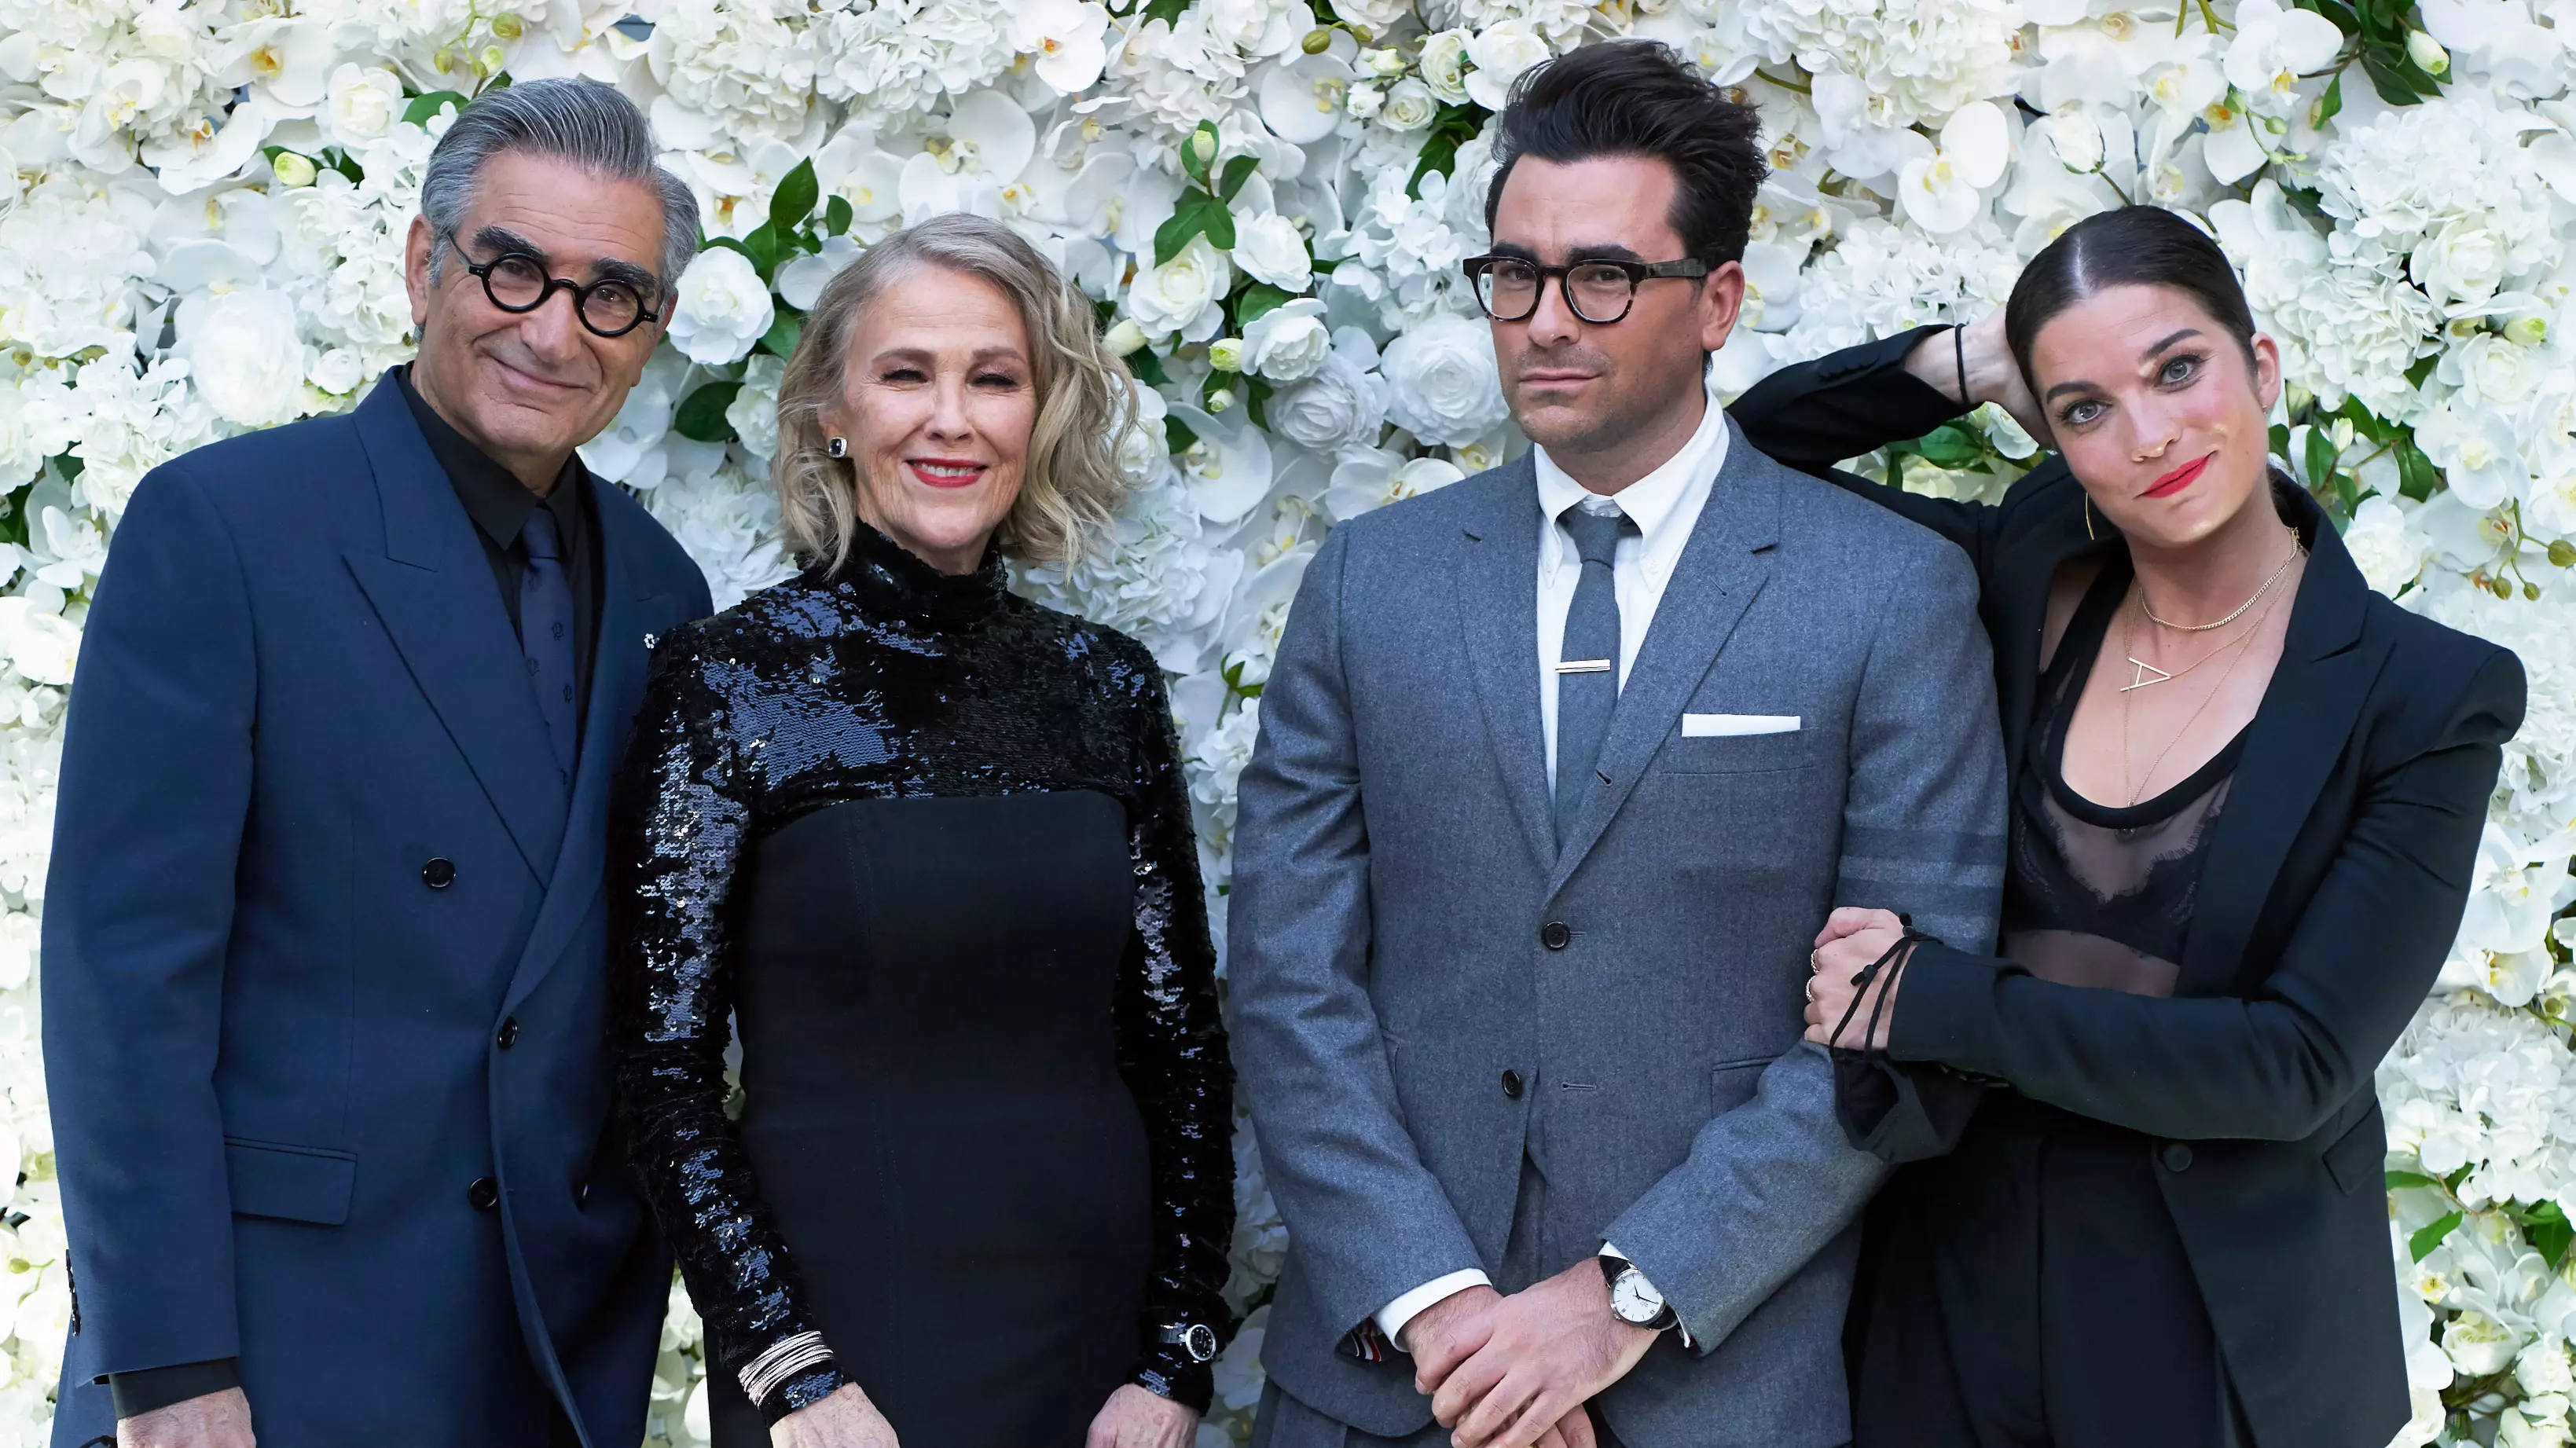 A Schitt's Creek Movie Could Soon Be Made After The Show's Massive Emmy Success